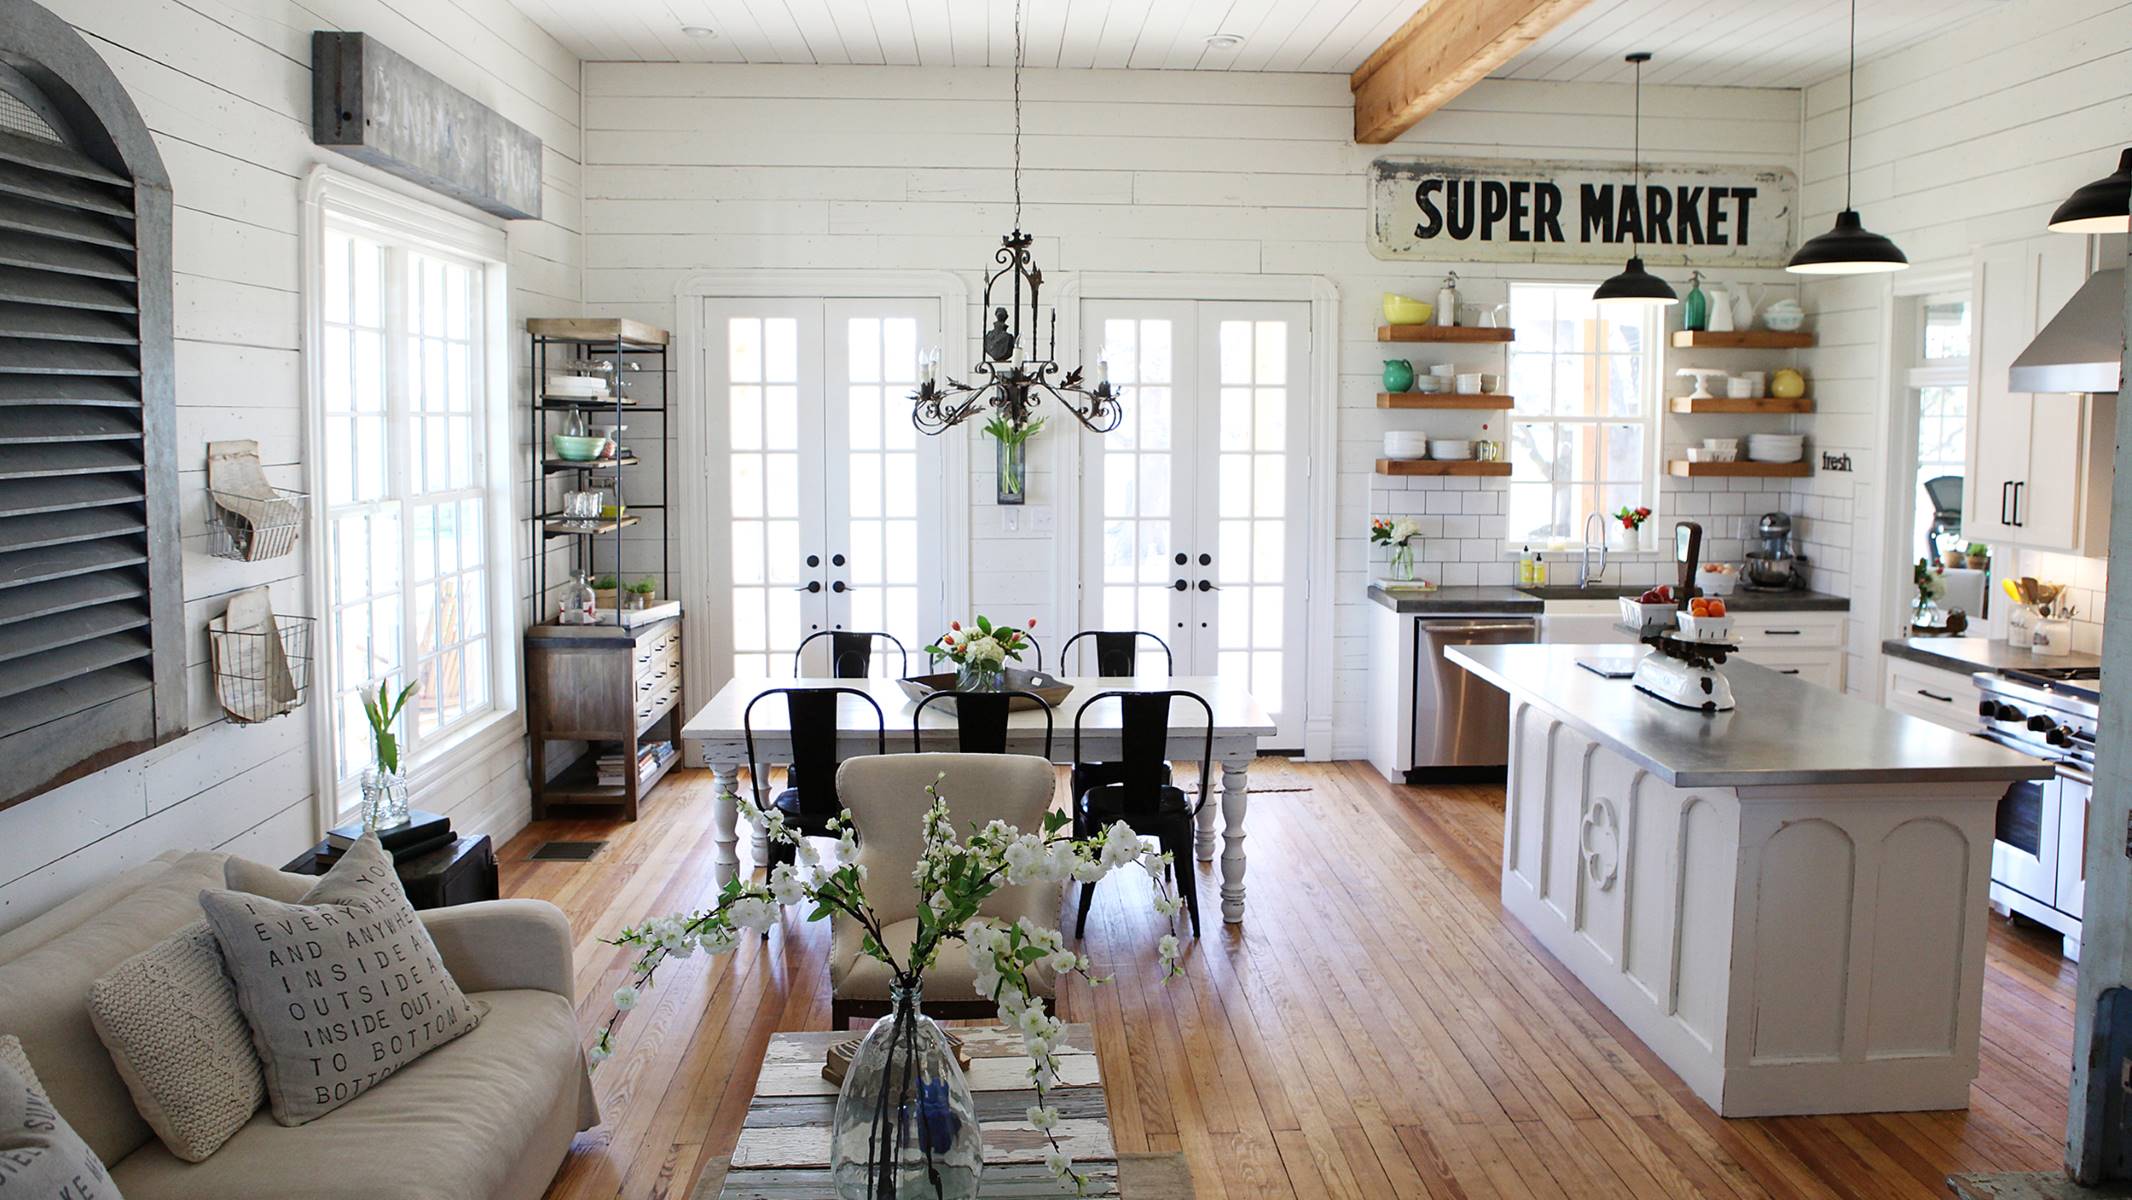 How To Design A House Like Chip And Joanna Gaines